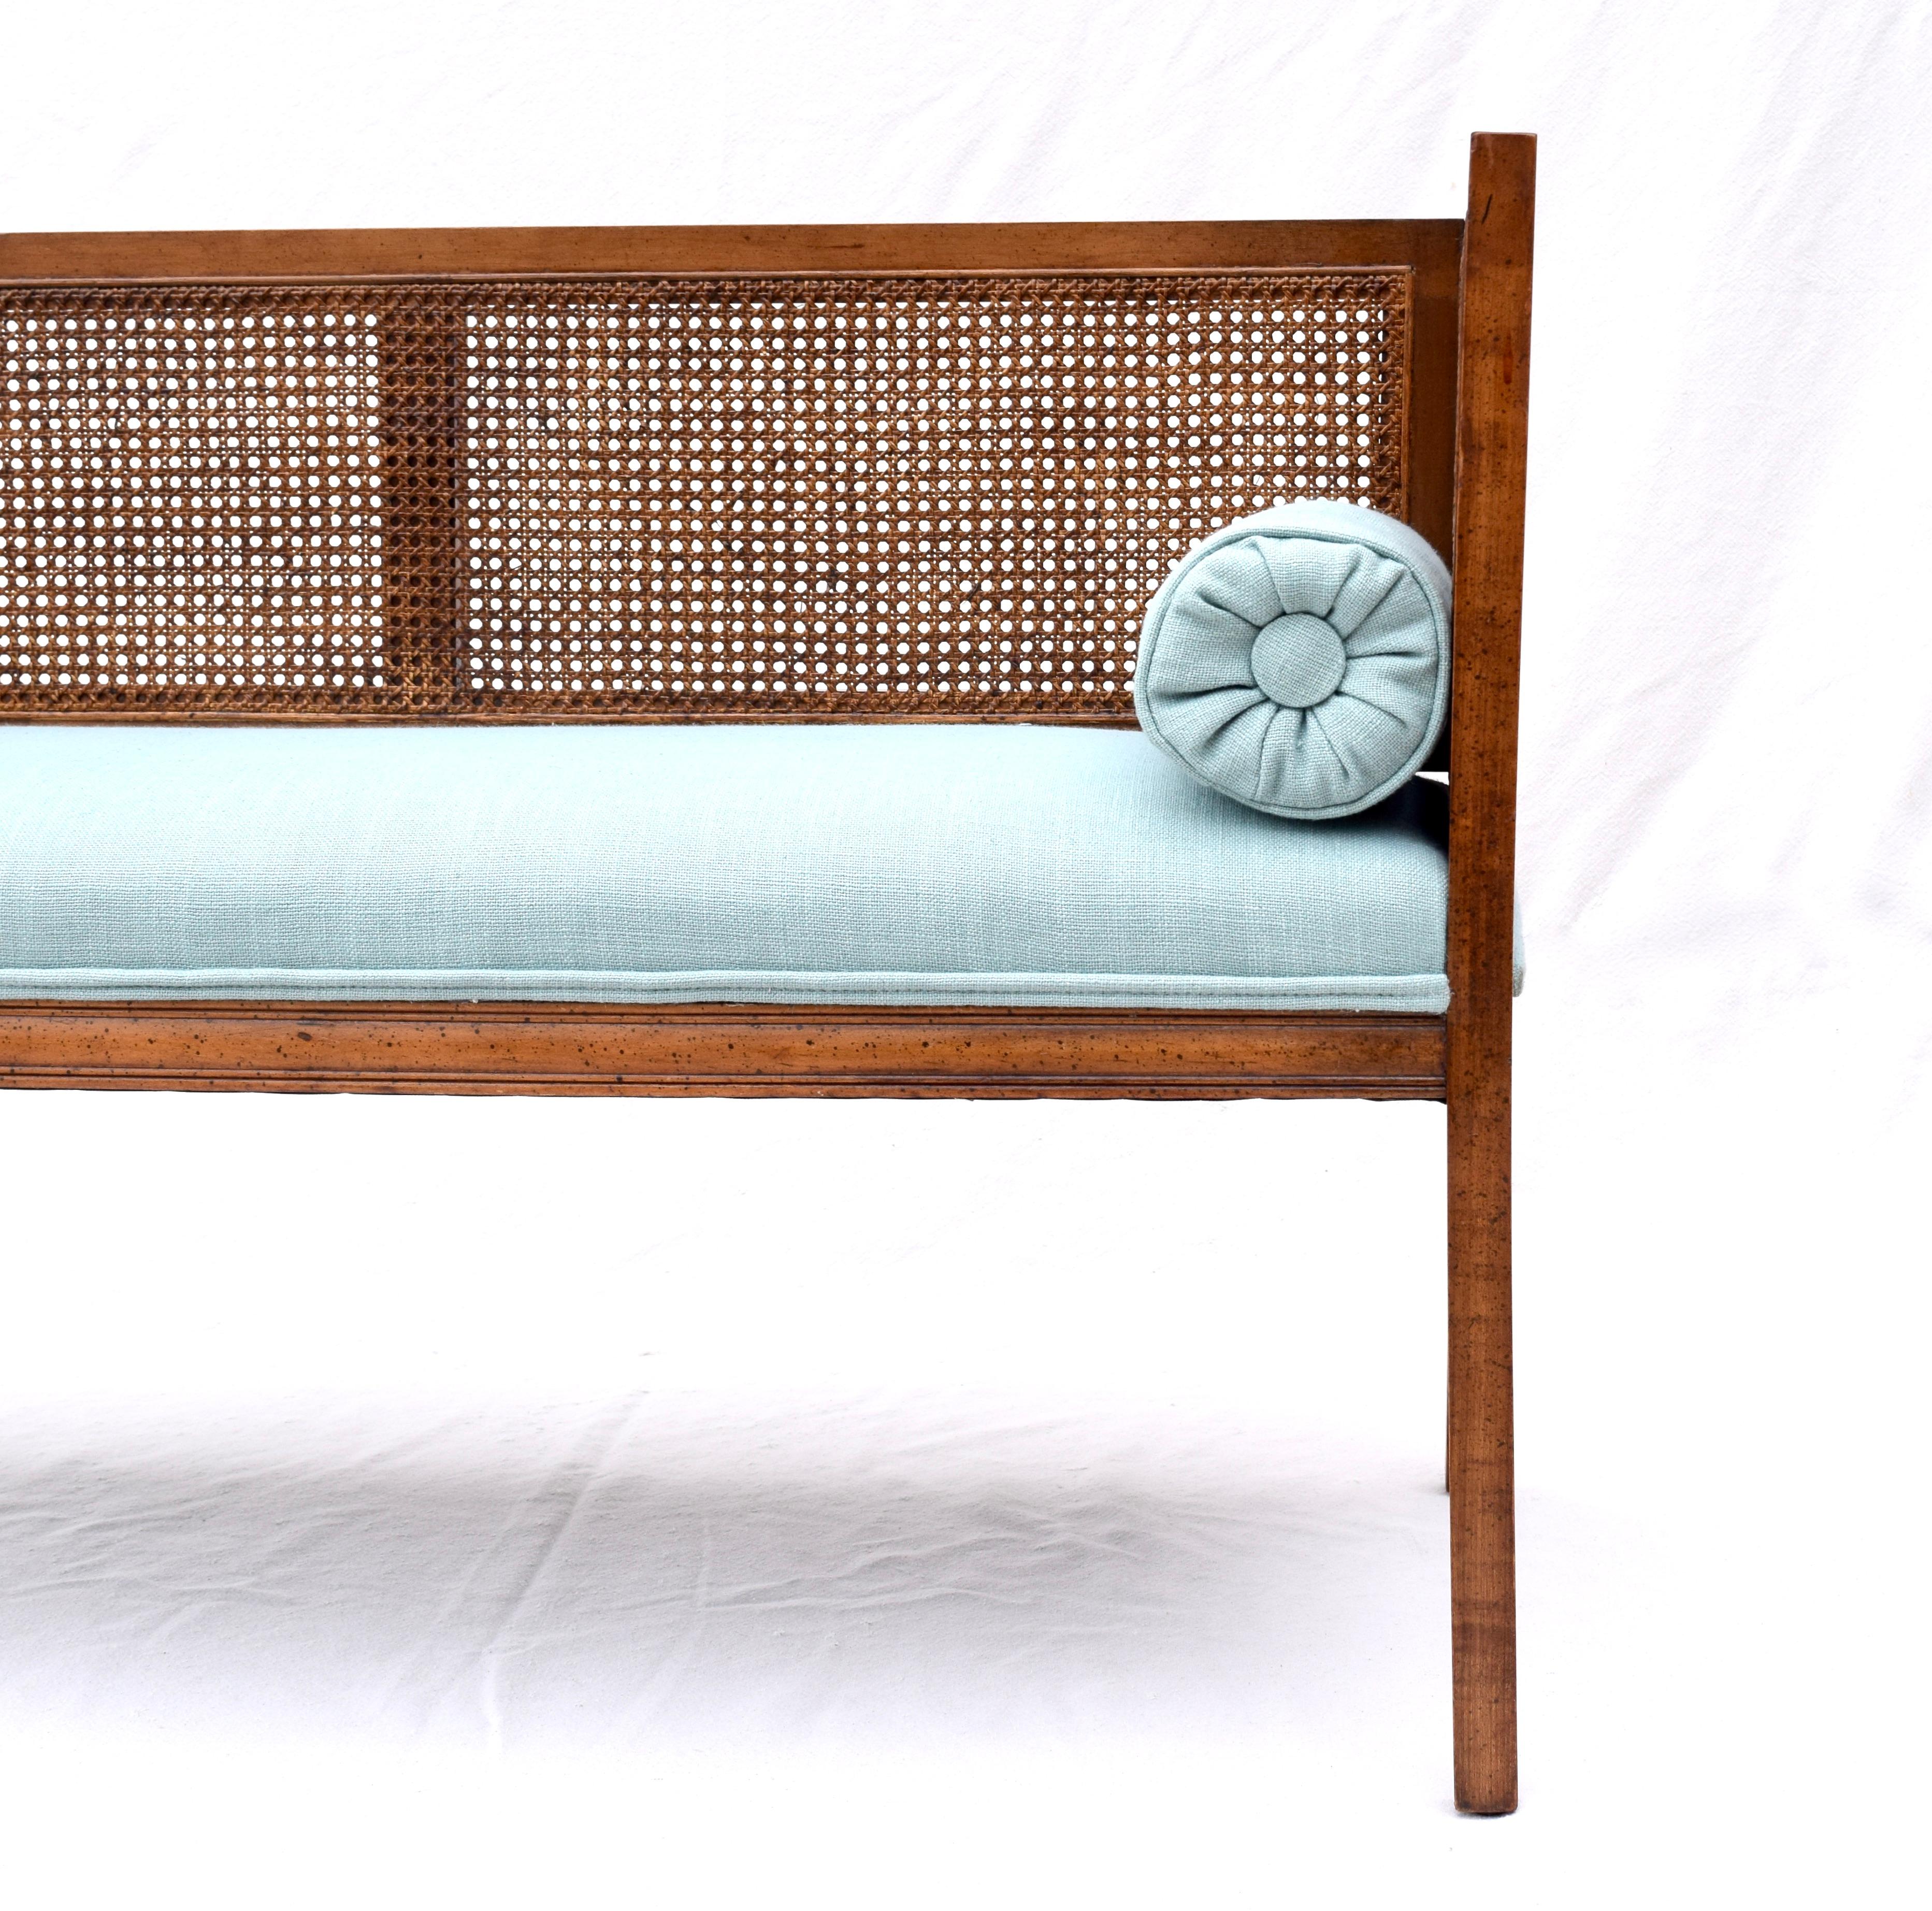 American 1950s Walnut Window Bench in the Manner of Edward Wormley for Dunbar